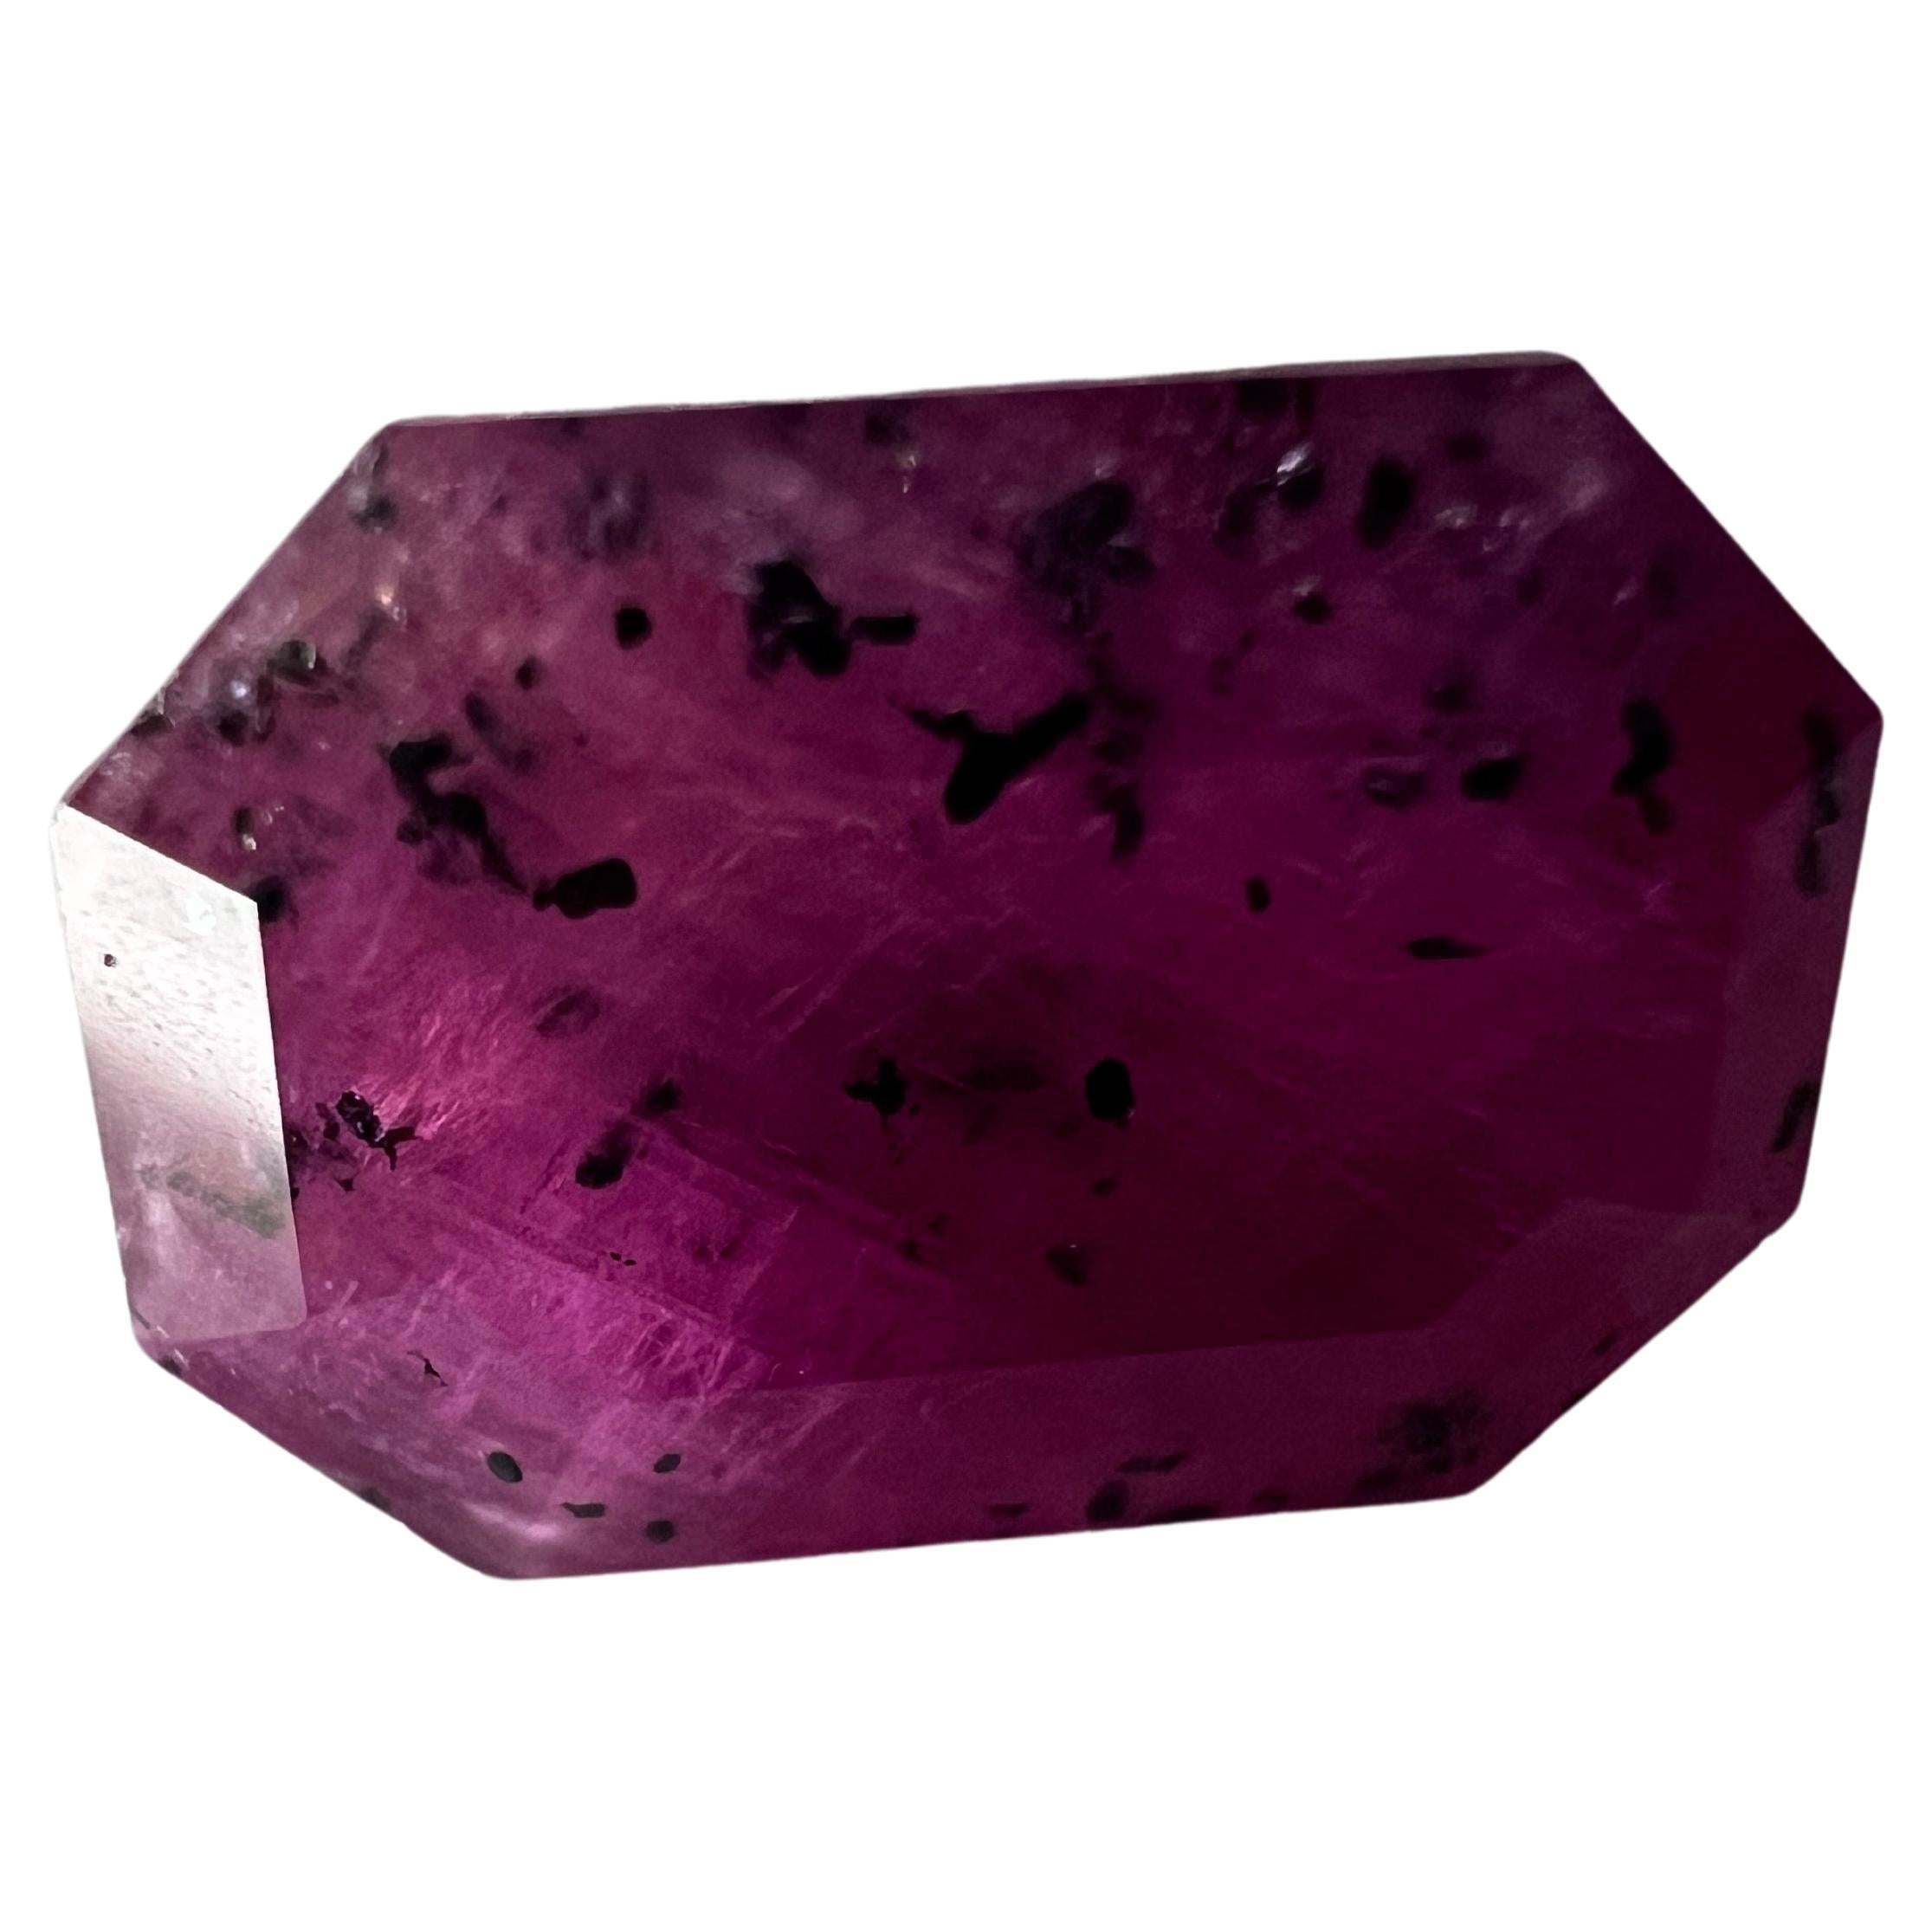 NO RESERVE 4.285ct NATURAL RUBY  Octagonal Cut Loose Gemstone For Sale 1